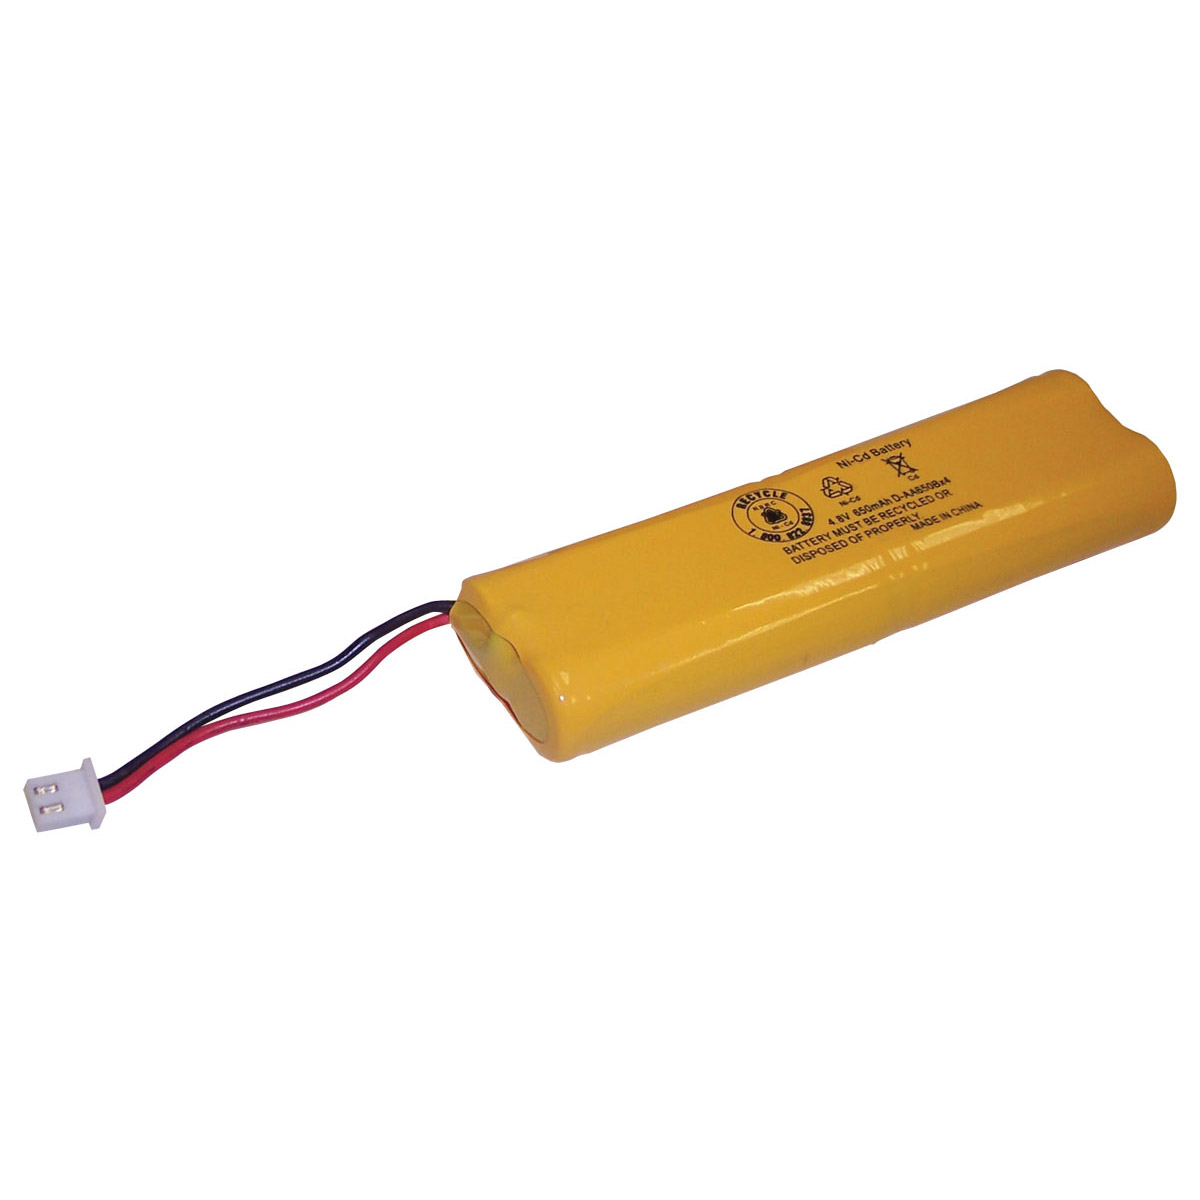 Picture of Nora Lighting NEB-NICAD7 3.6V 300mAh NiCAD Replacement Battery, Green